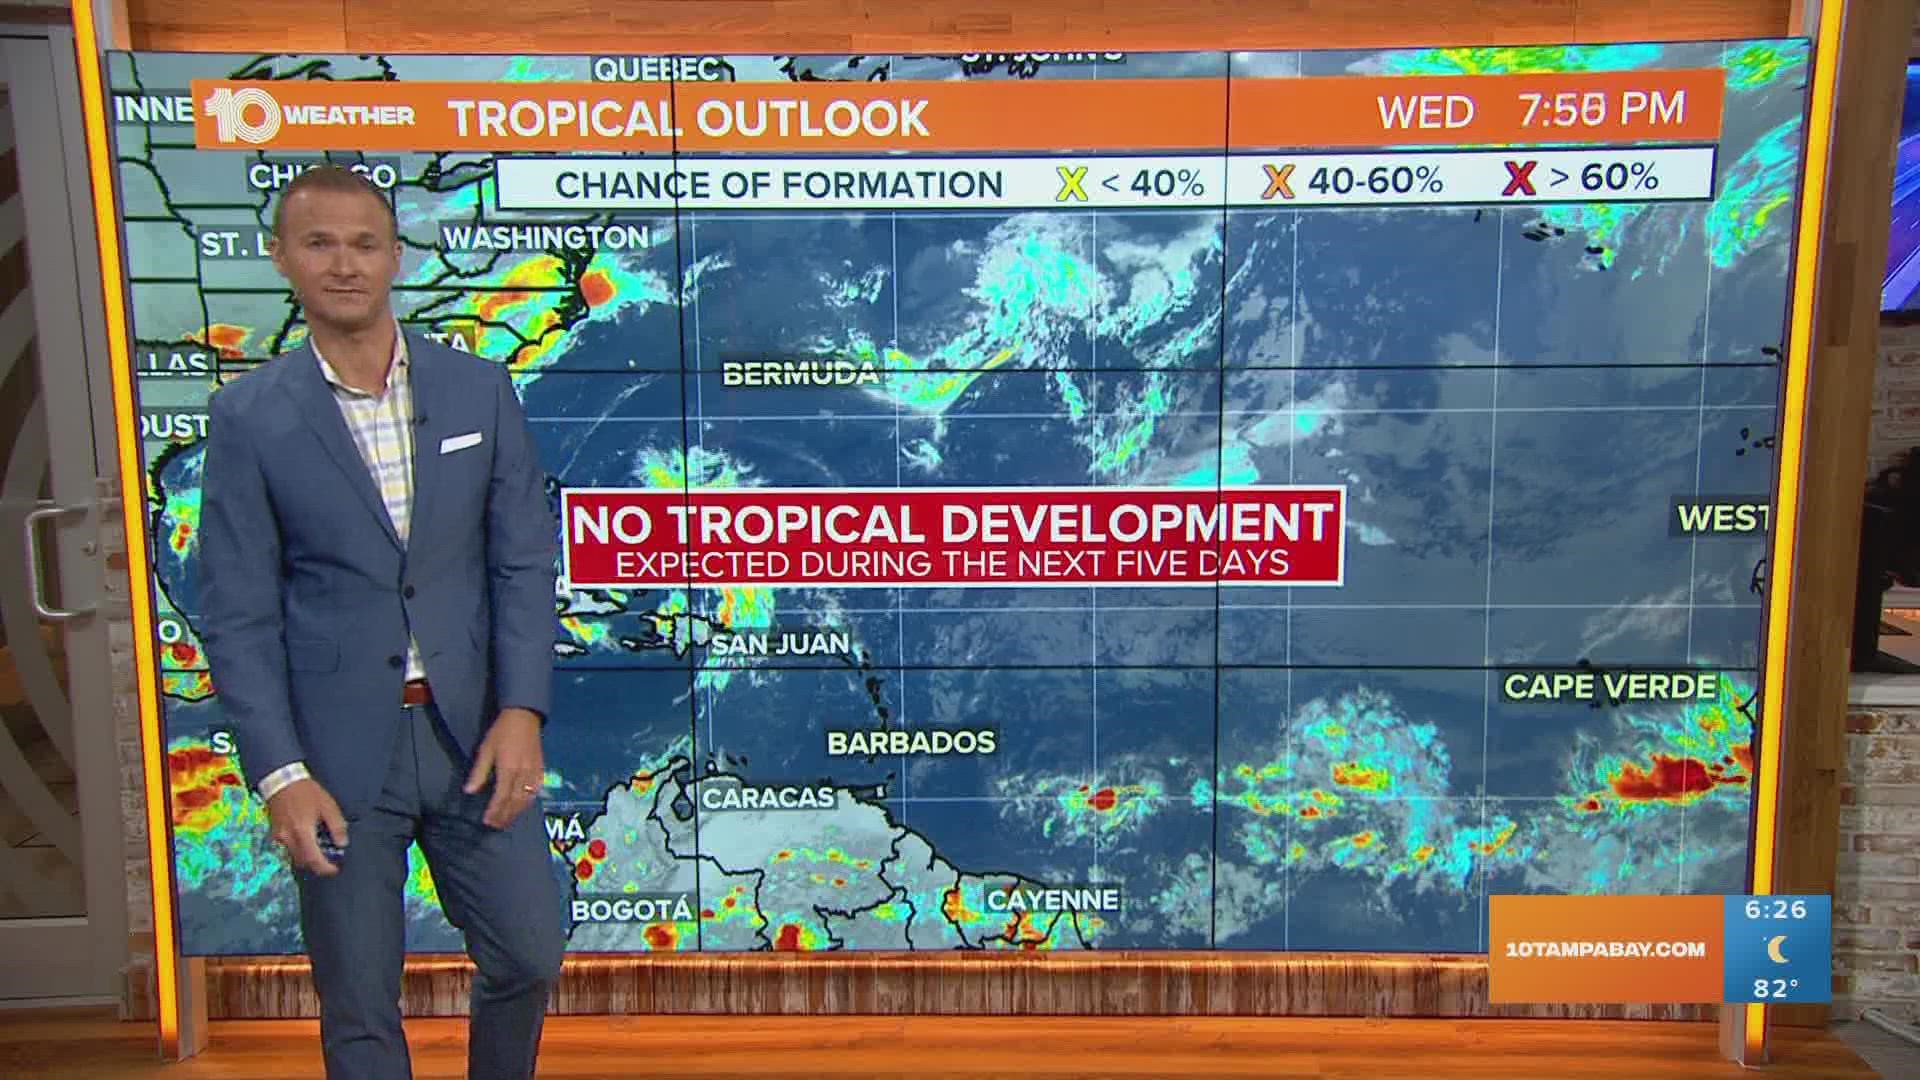 No tropical development is expected in the next five days. But we've still got a lot of hurricane season left.